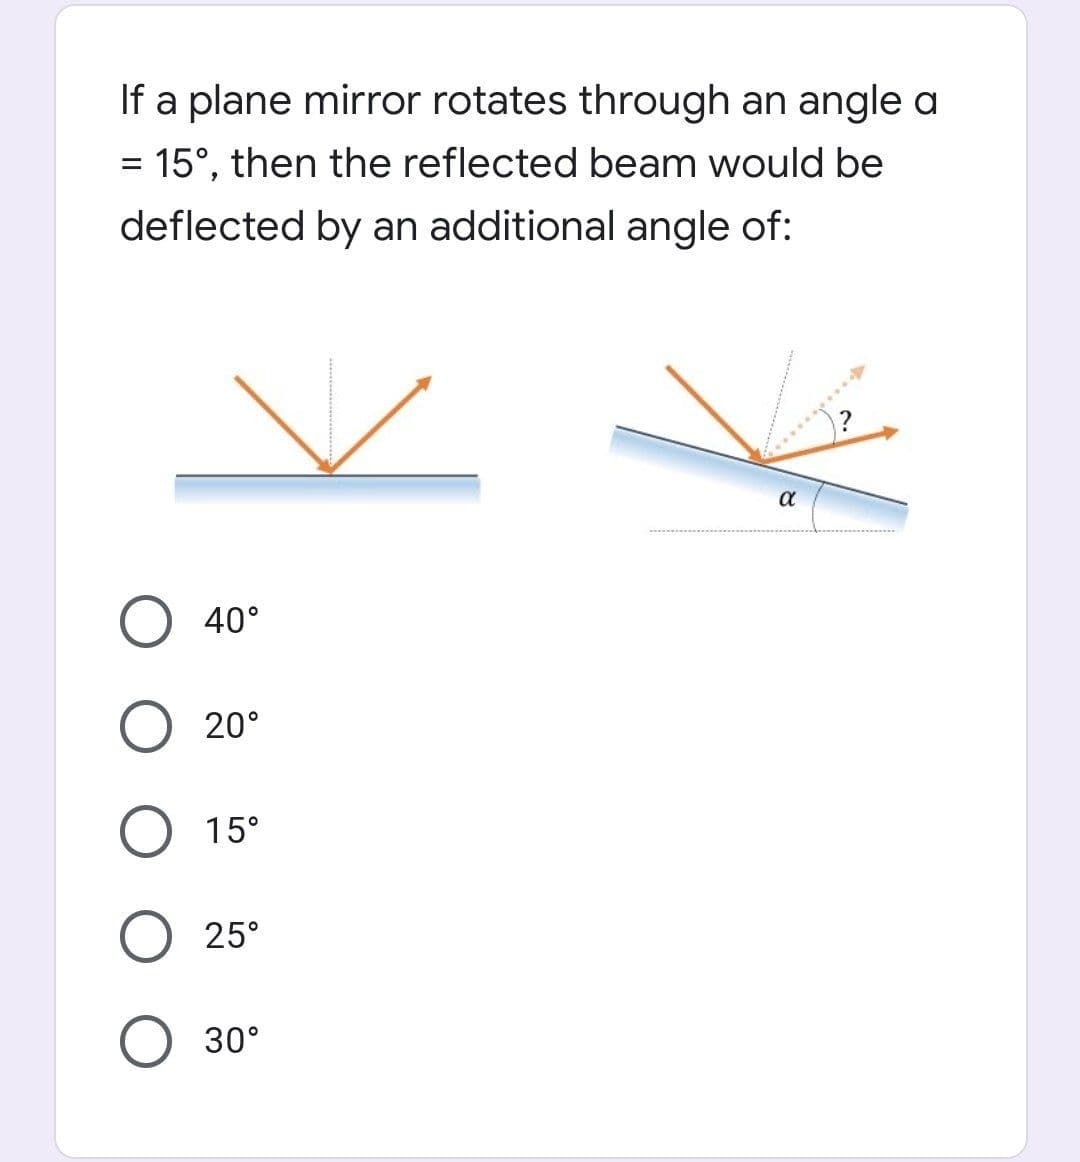 If a plane mirror rotates through an angle a
= 15°, then the reflected beam would be
deflected by an additional angle of:
a
40°
20°
15°
25°
30°
